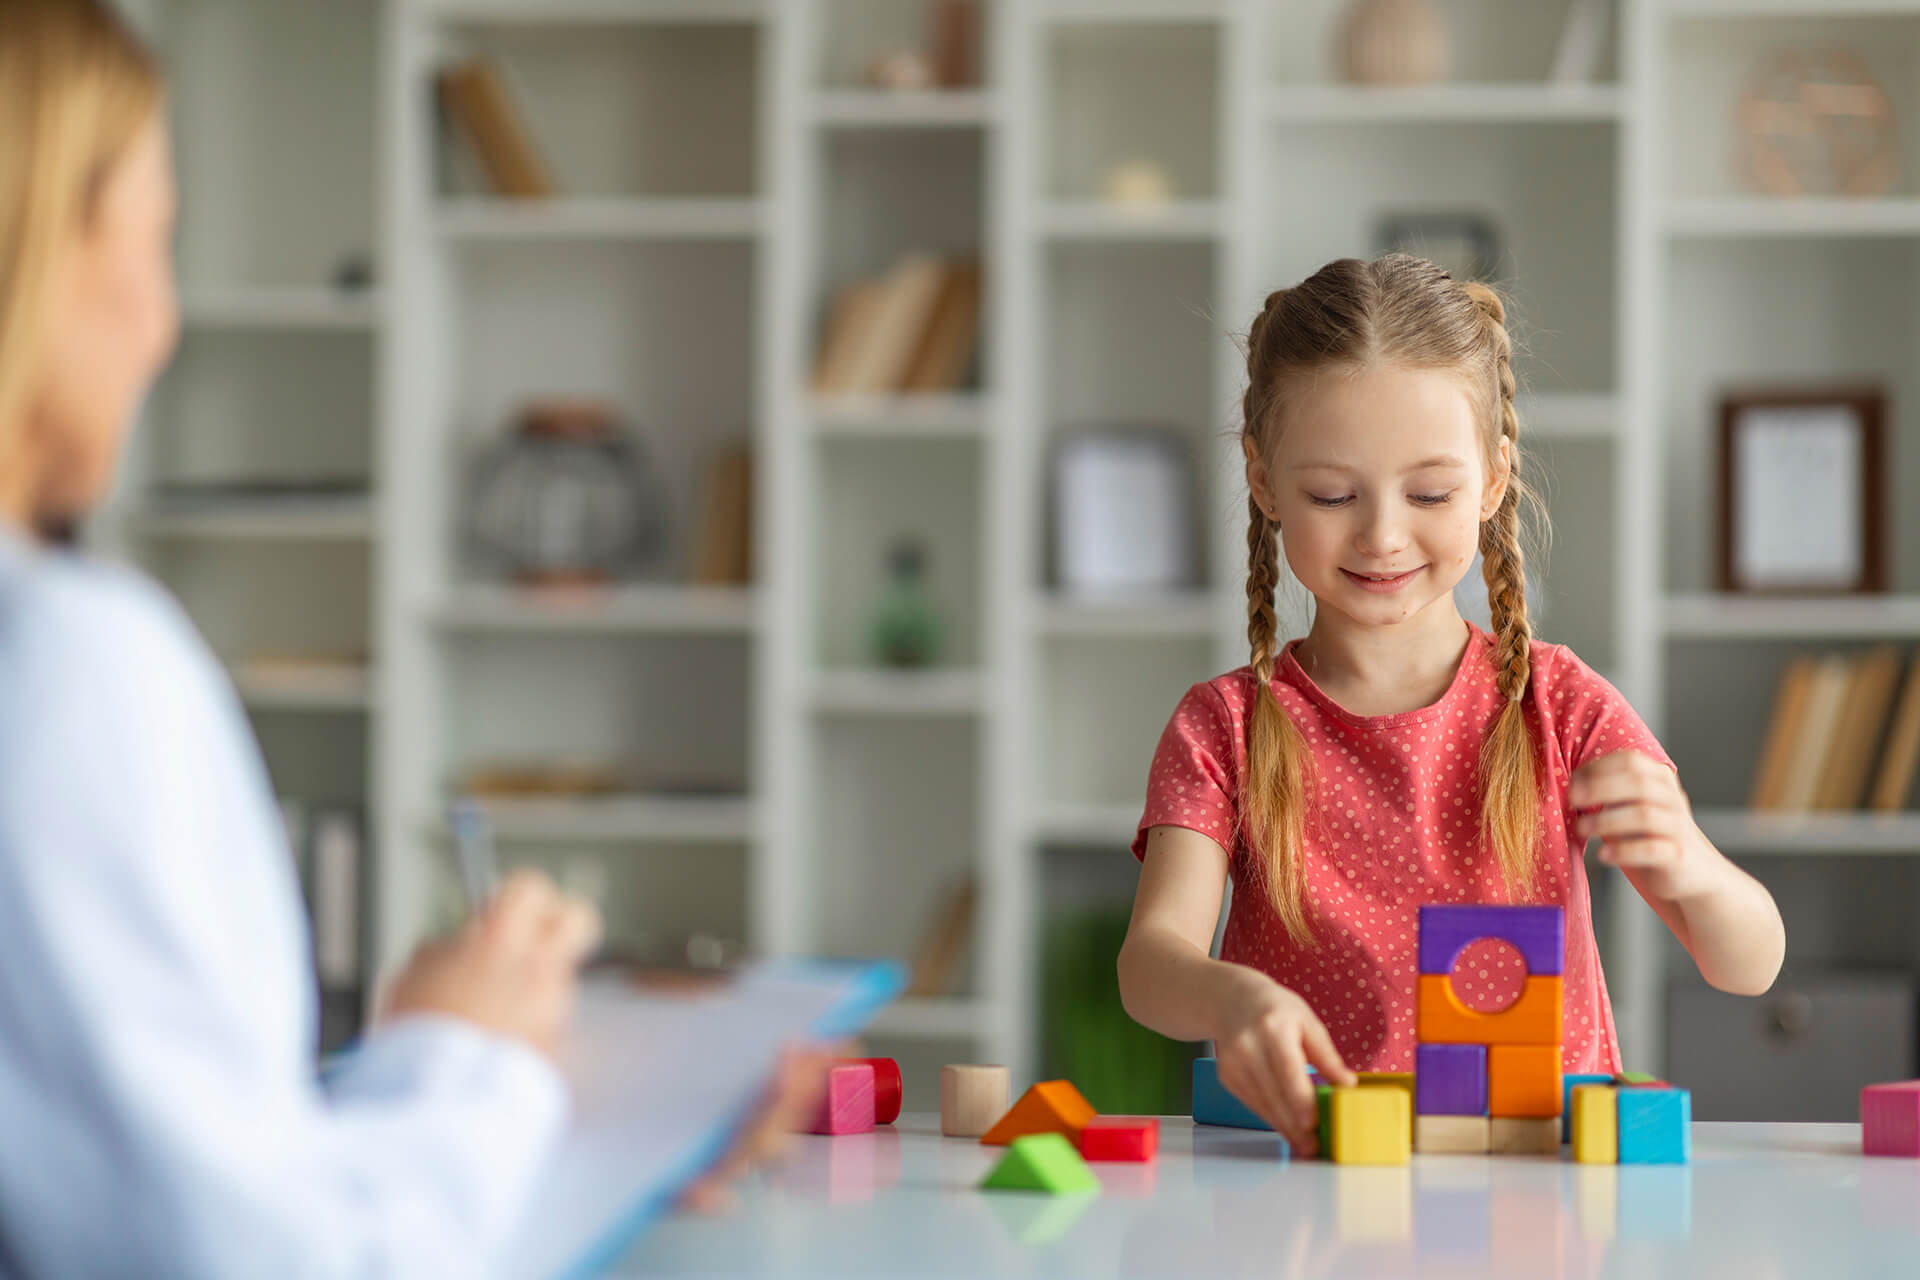 Young girl engrossed in building with puzzle blocks, using play therapy as a tool for development or treatment of eating disorders such as anorexia, bulimia, and binge eating